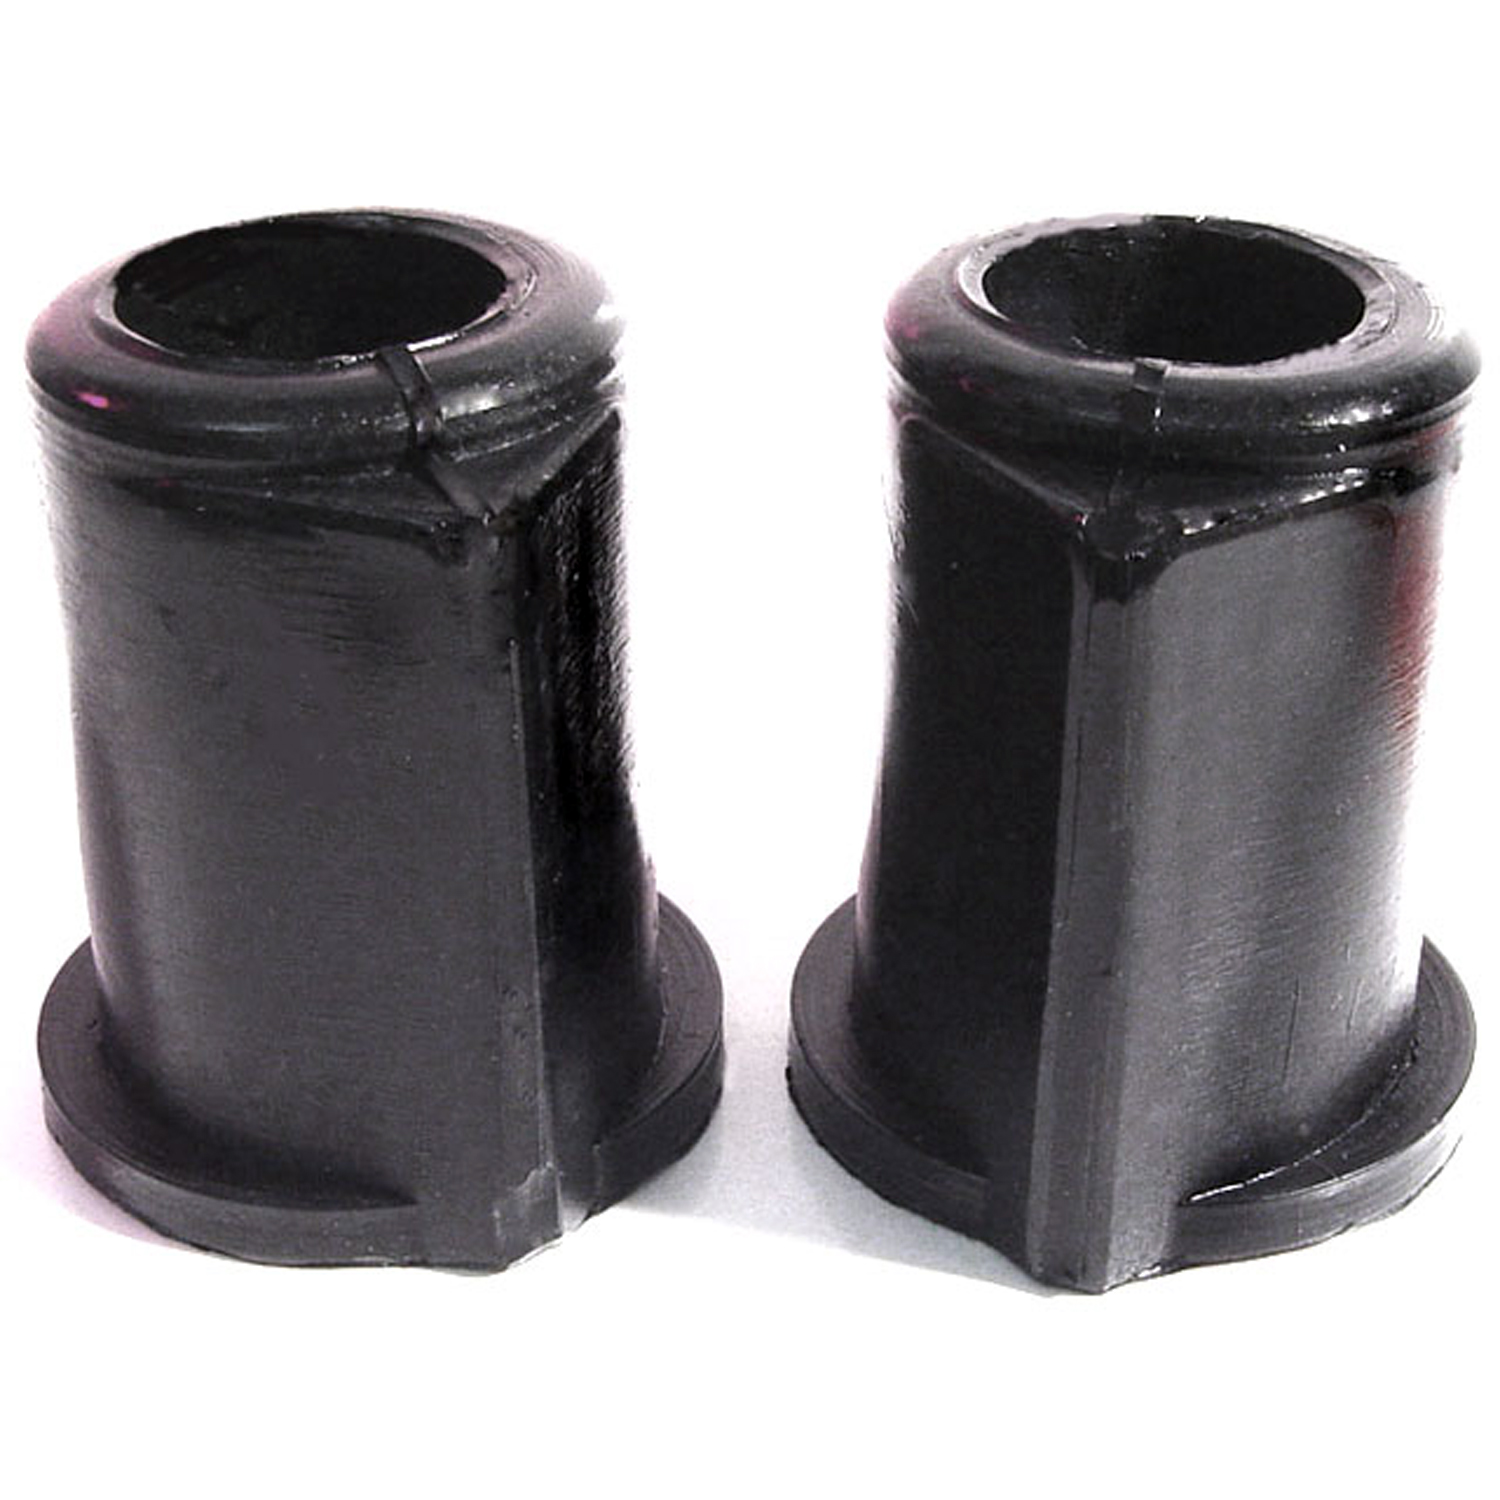 1946 Lincoln 66H Series Sway Bar Bushings.  Made with cloth reinforcement-BN 32-C